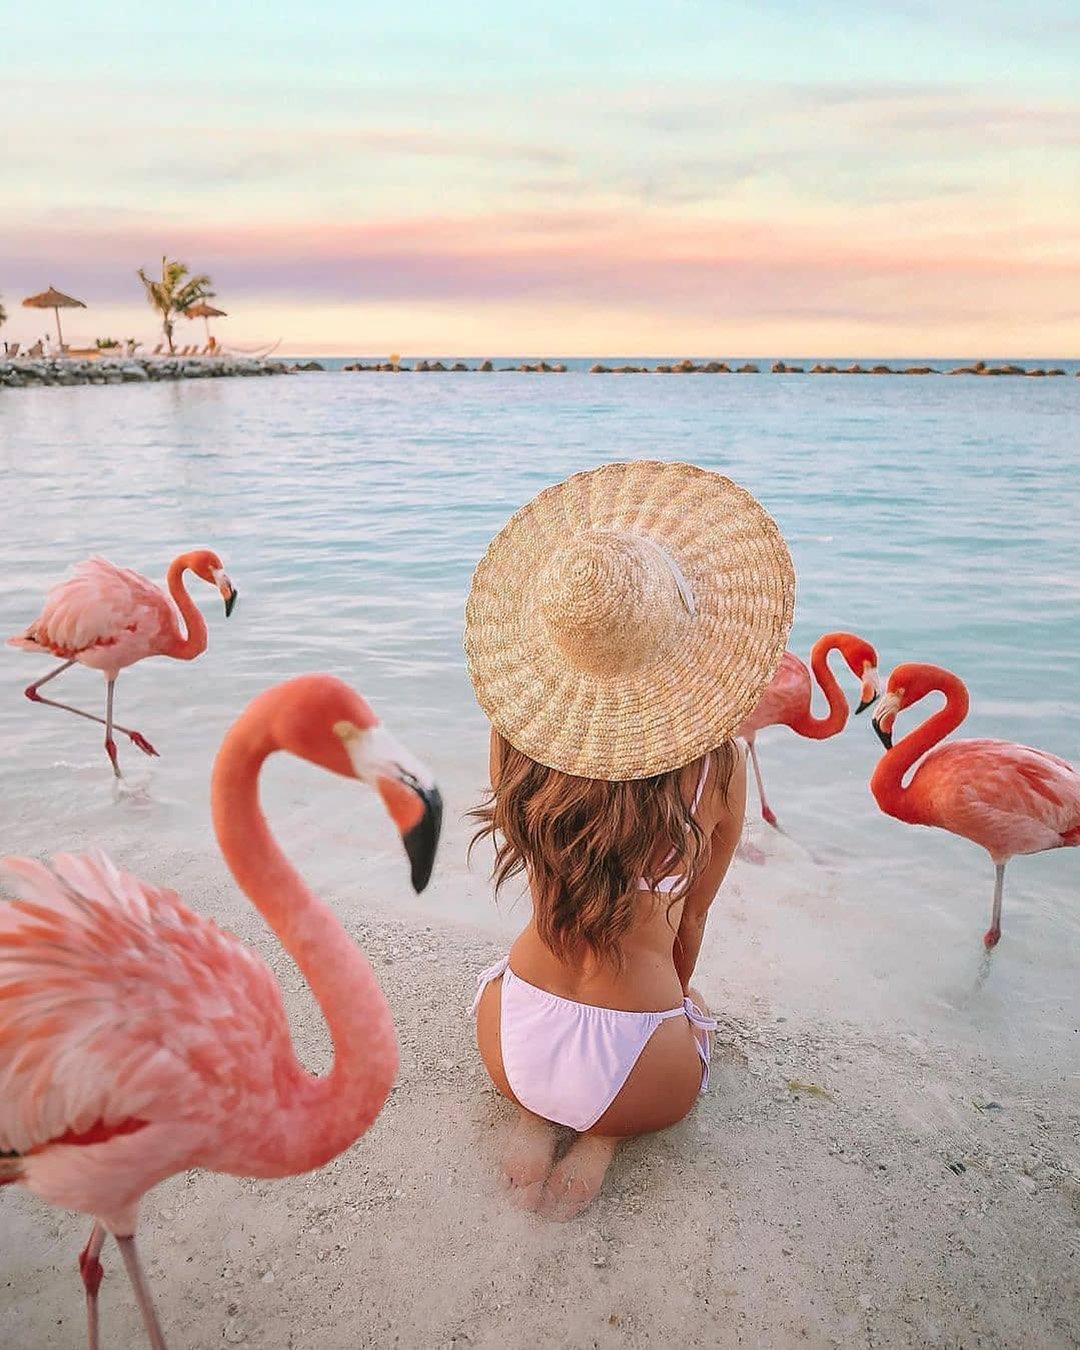 affordable honeymoon packages aruba with pink flamingos cmcoving